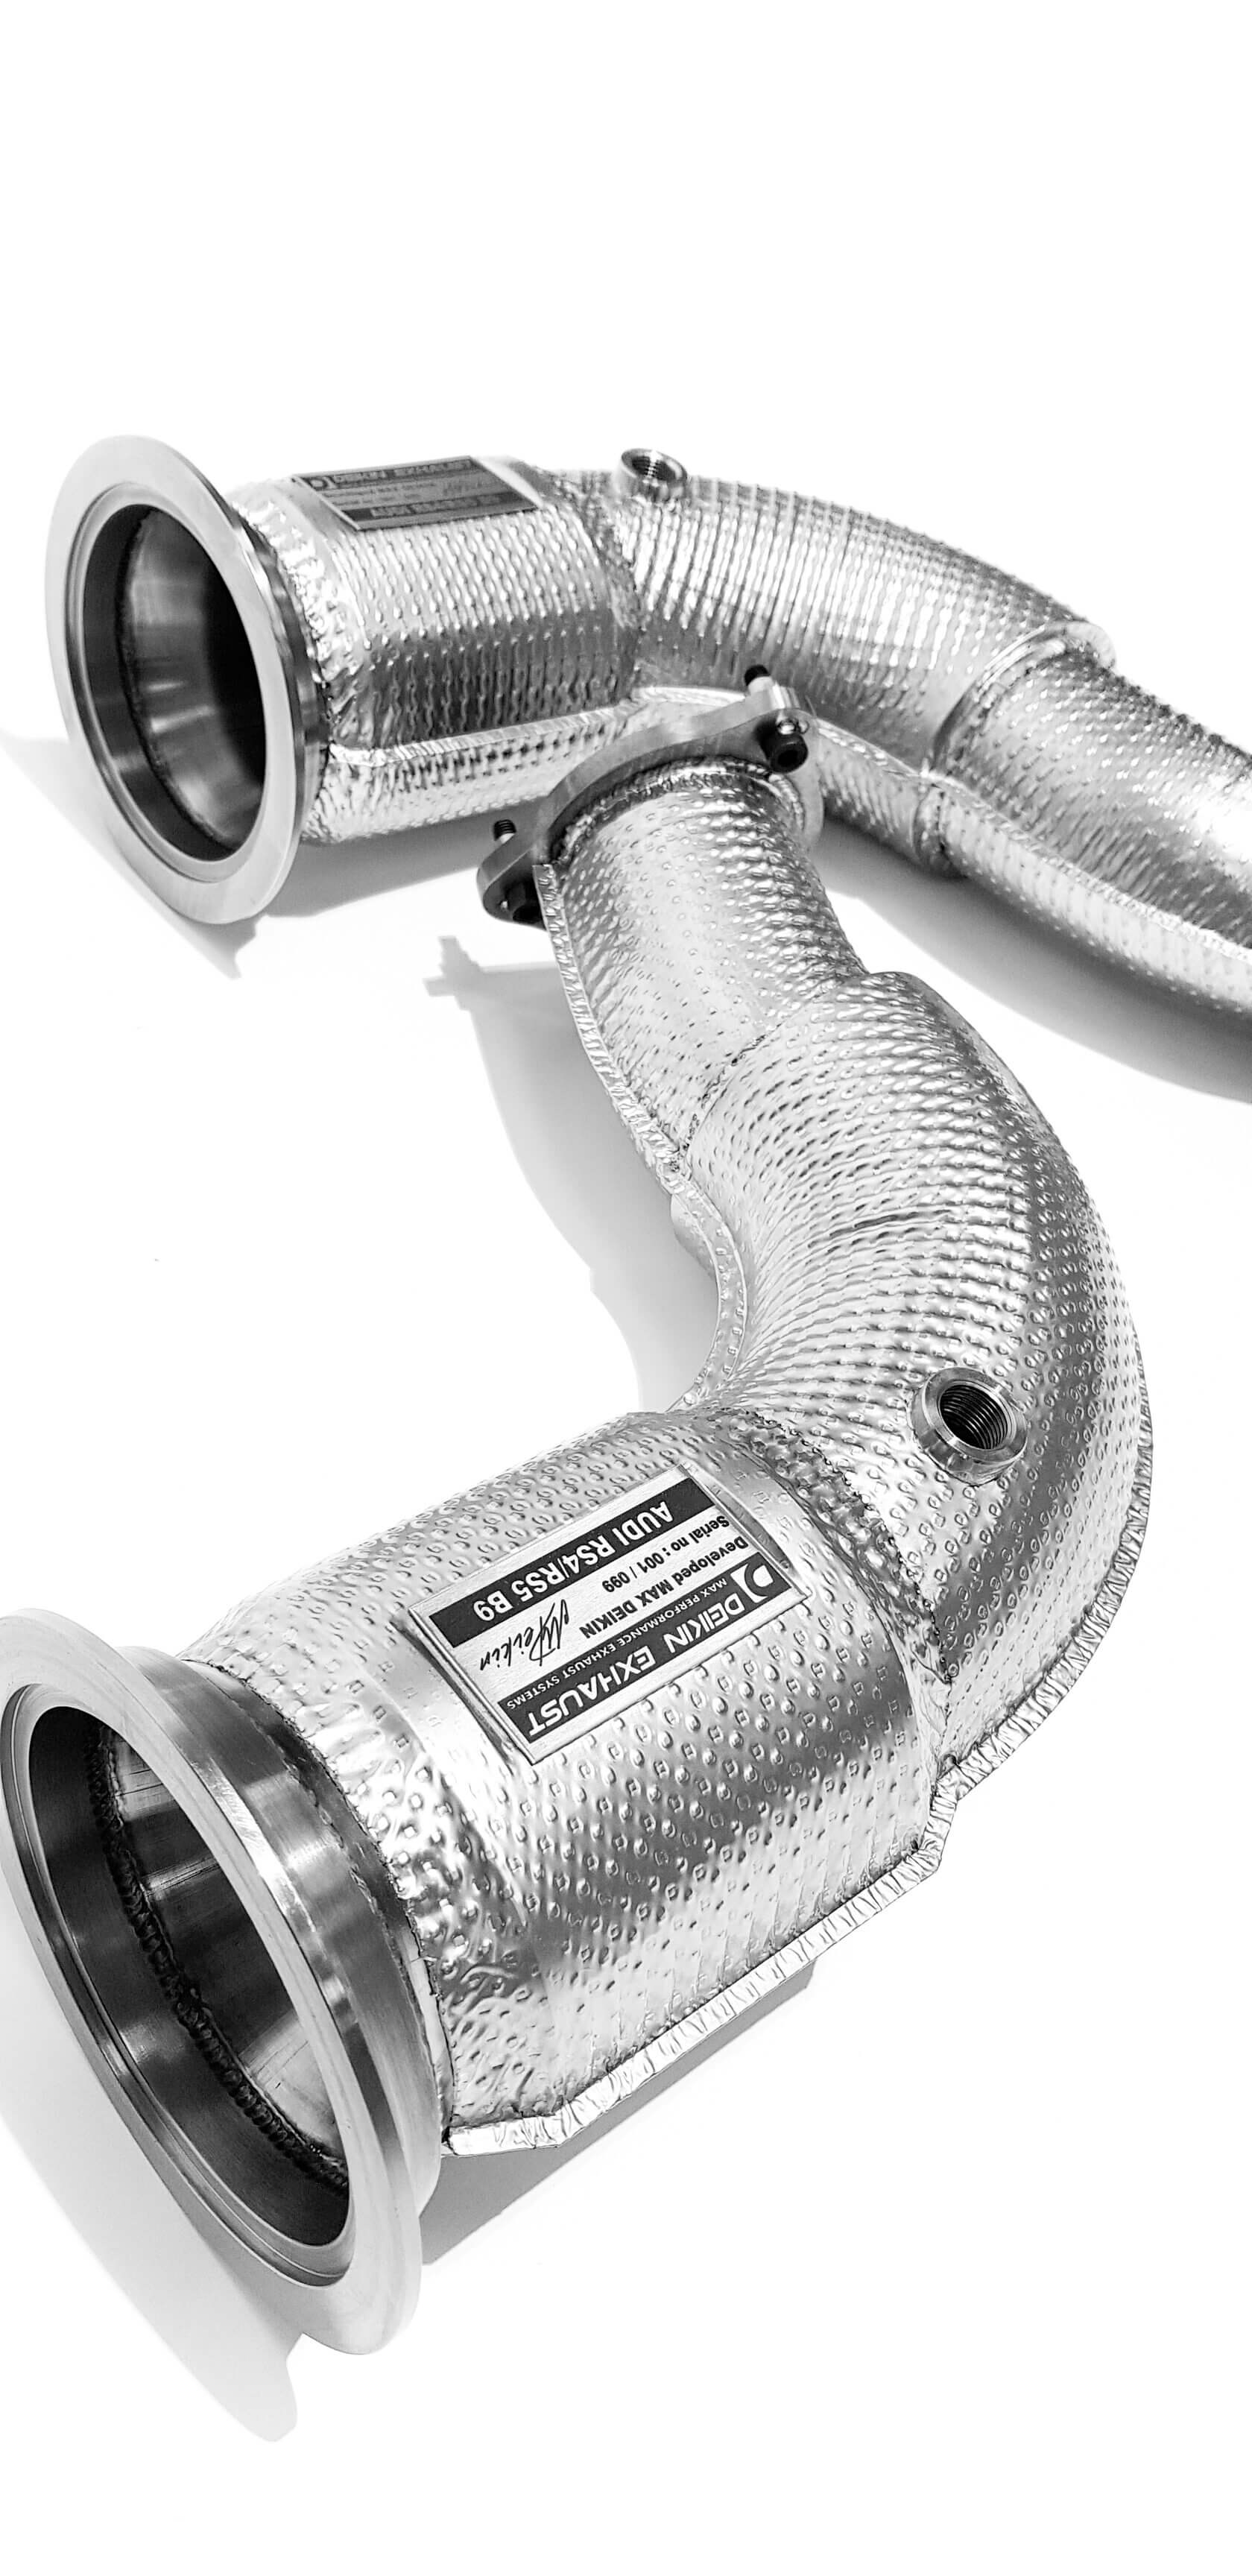 DEIKIN 10-AUDI.RS4.B9-DPT Downpipe for AUDI RS4 (B9) with thermal insulation HeatShield Photo-1 